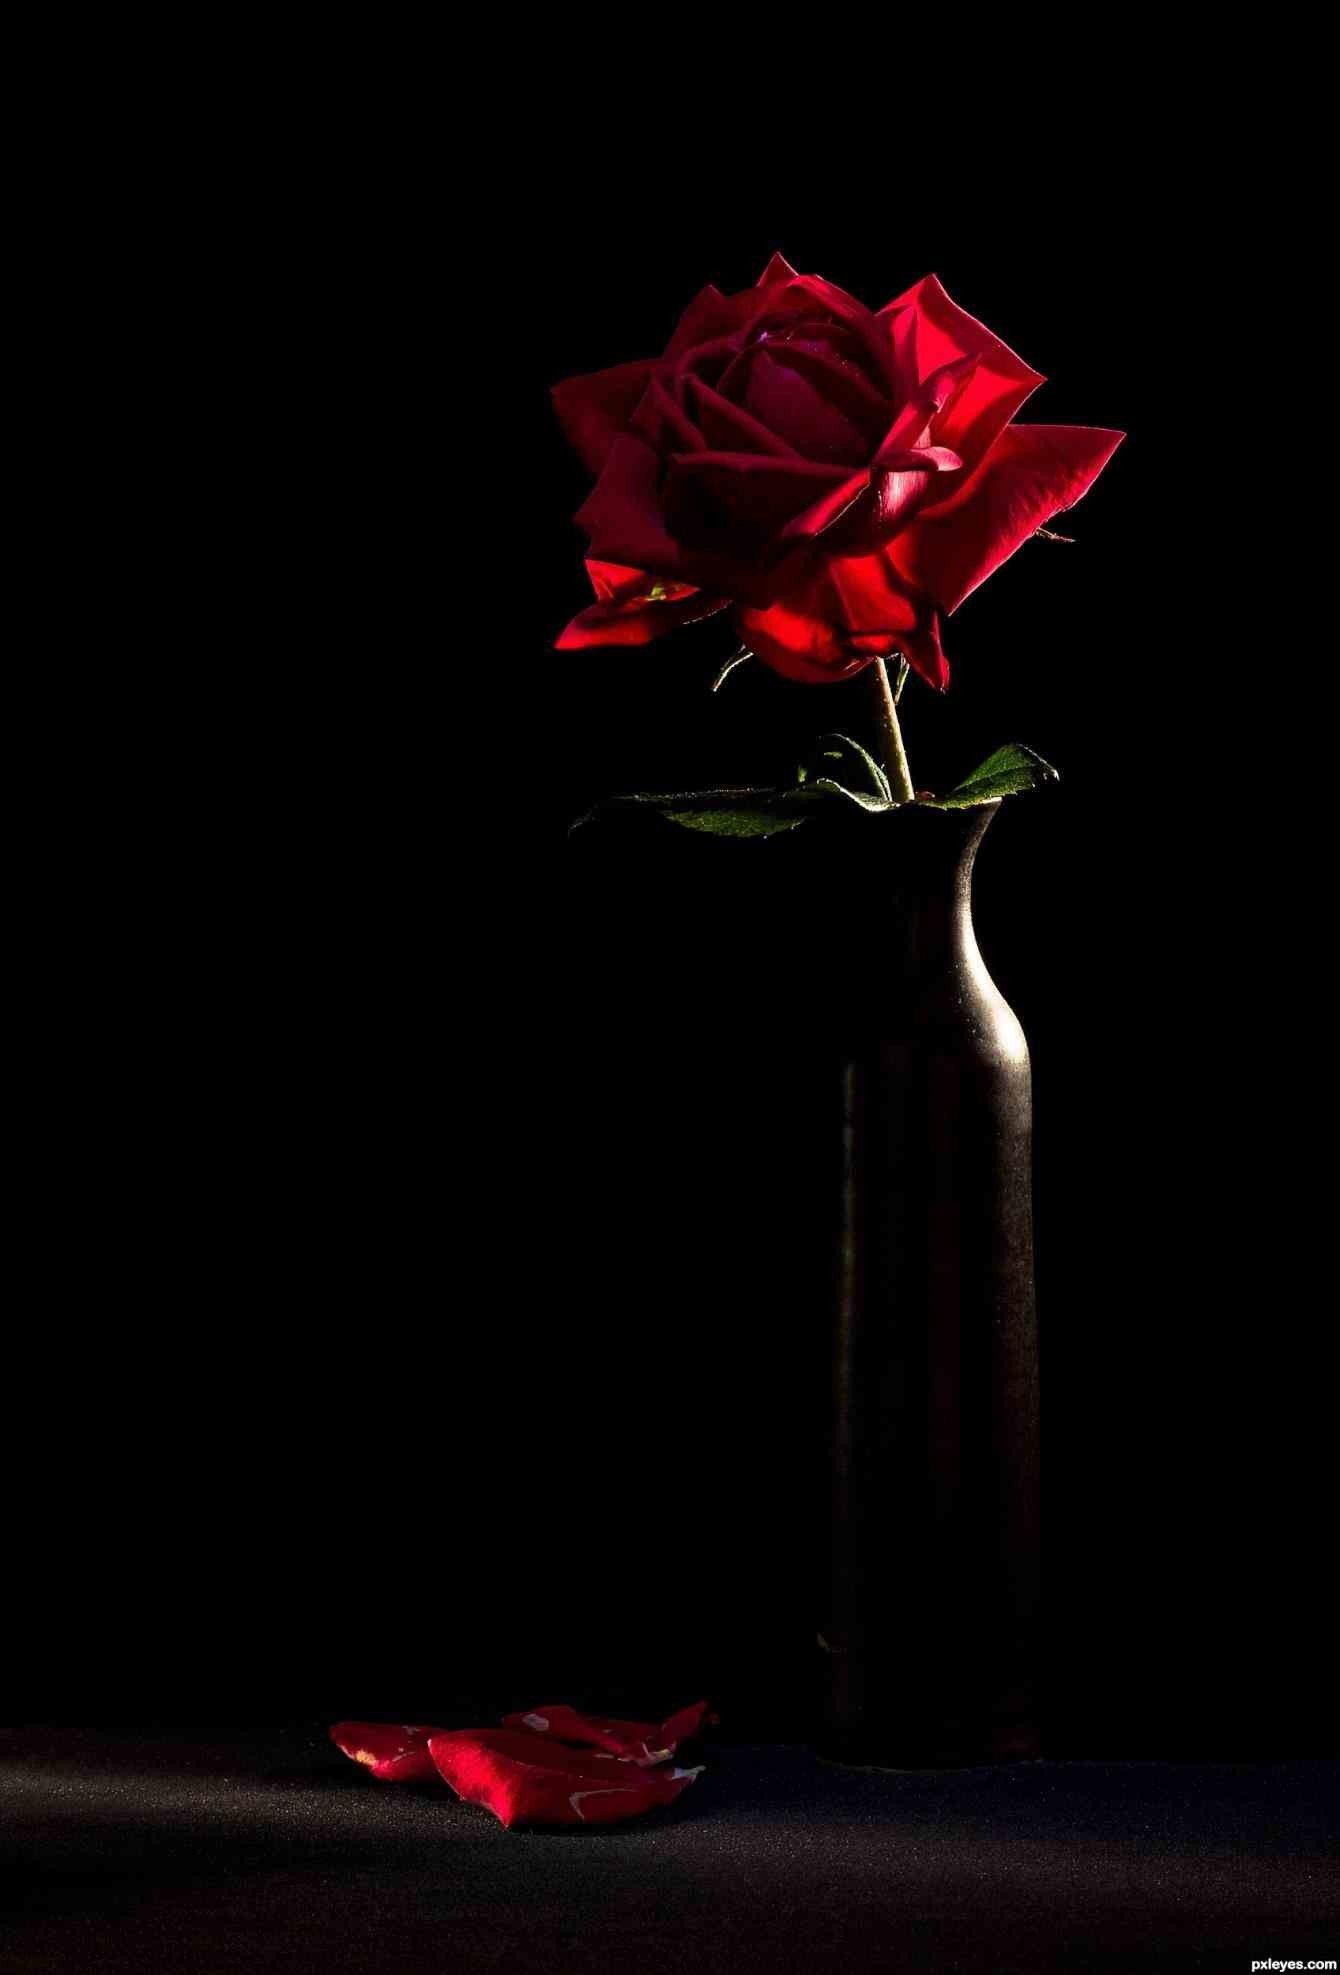 Black and Red Rose Wallpapers - Top Free Black and Red Rose Backgrounds